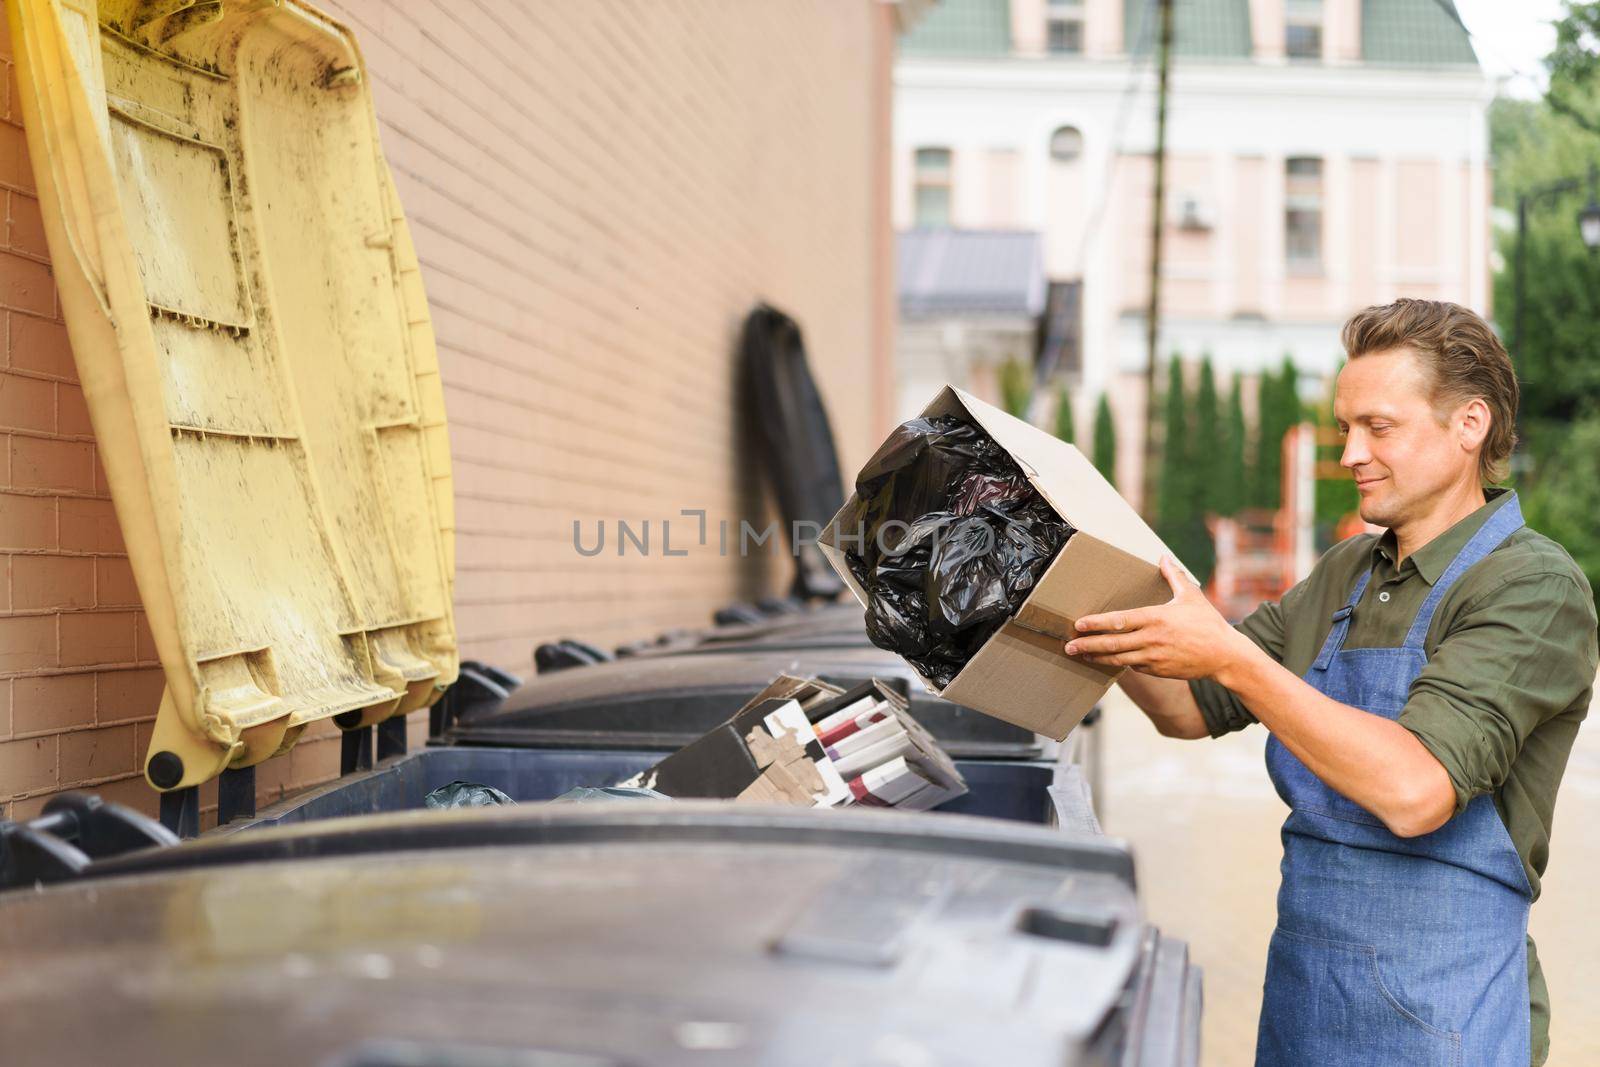 Throwing away unsorted trash employee man wearing apron put cardboard box with garbage plastic bag in it. Wrong unsorted garbage cans. Wrong way to throw your trash. Sorting garbage save the world.